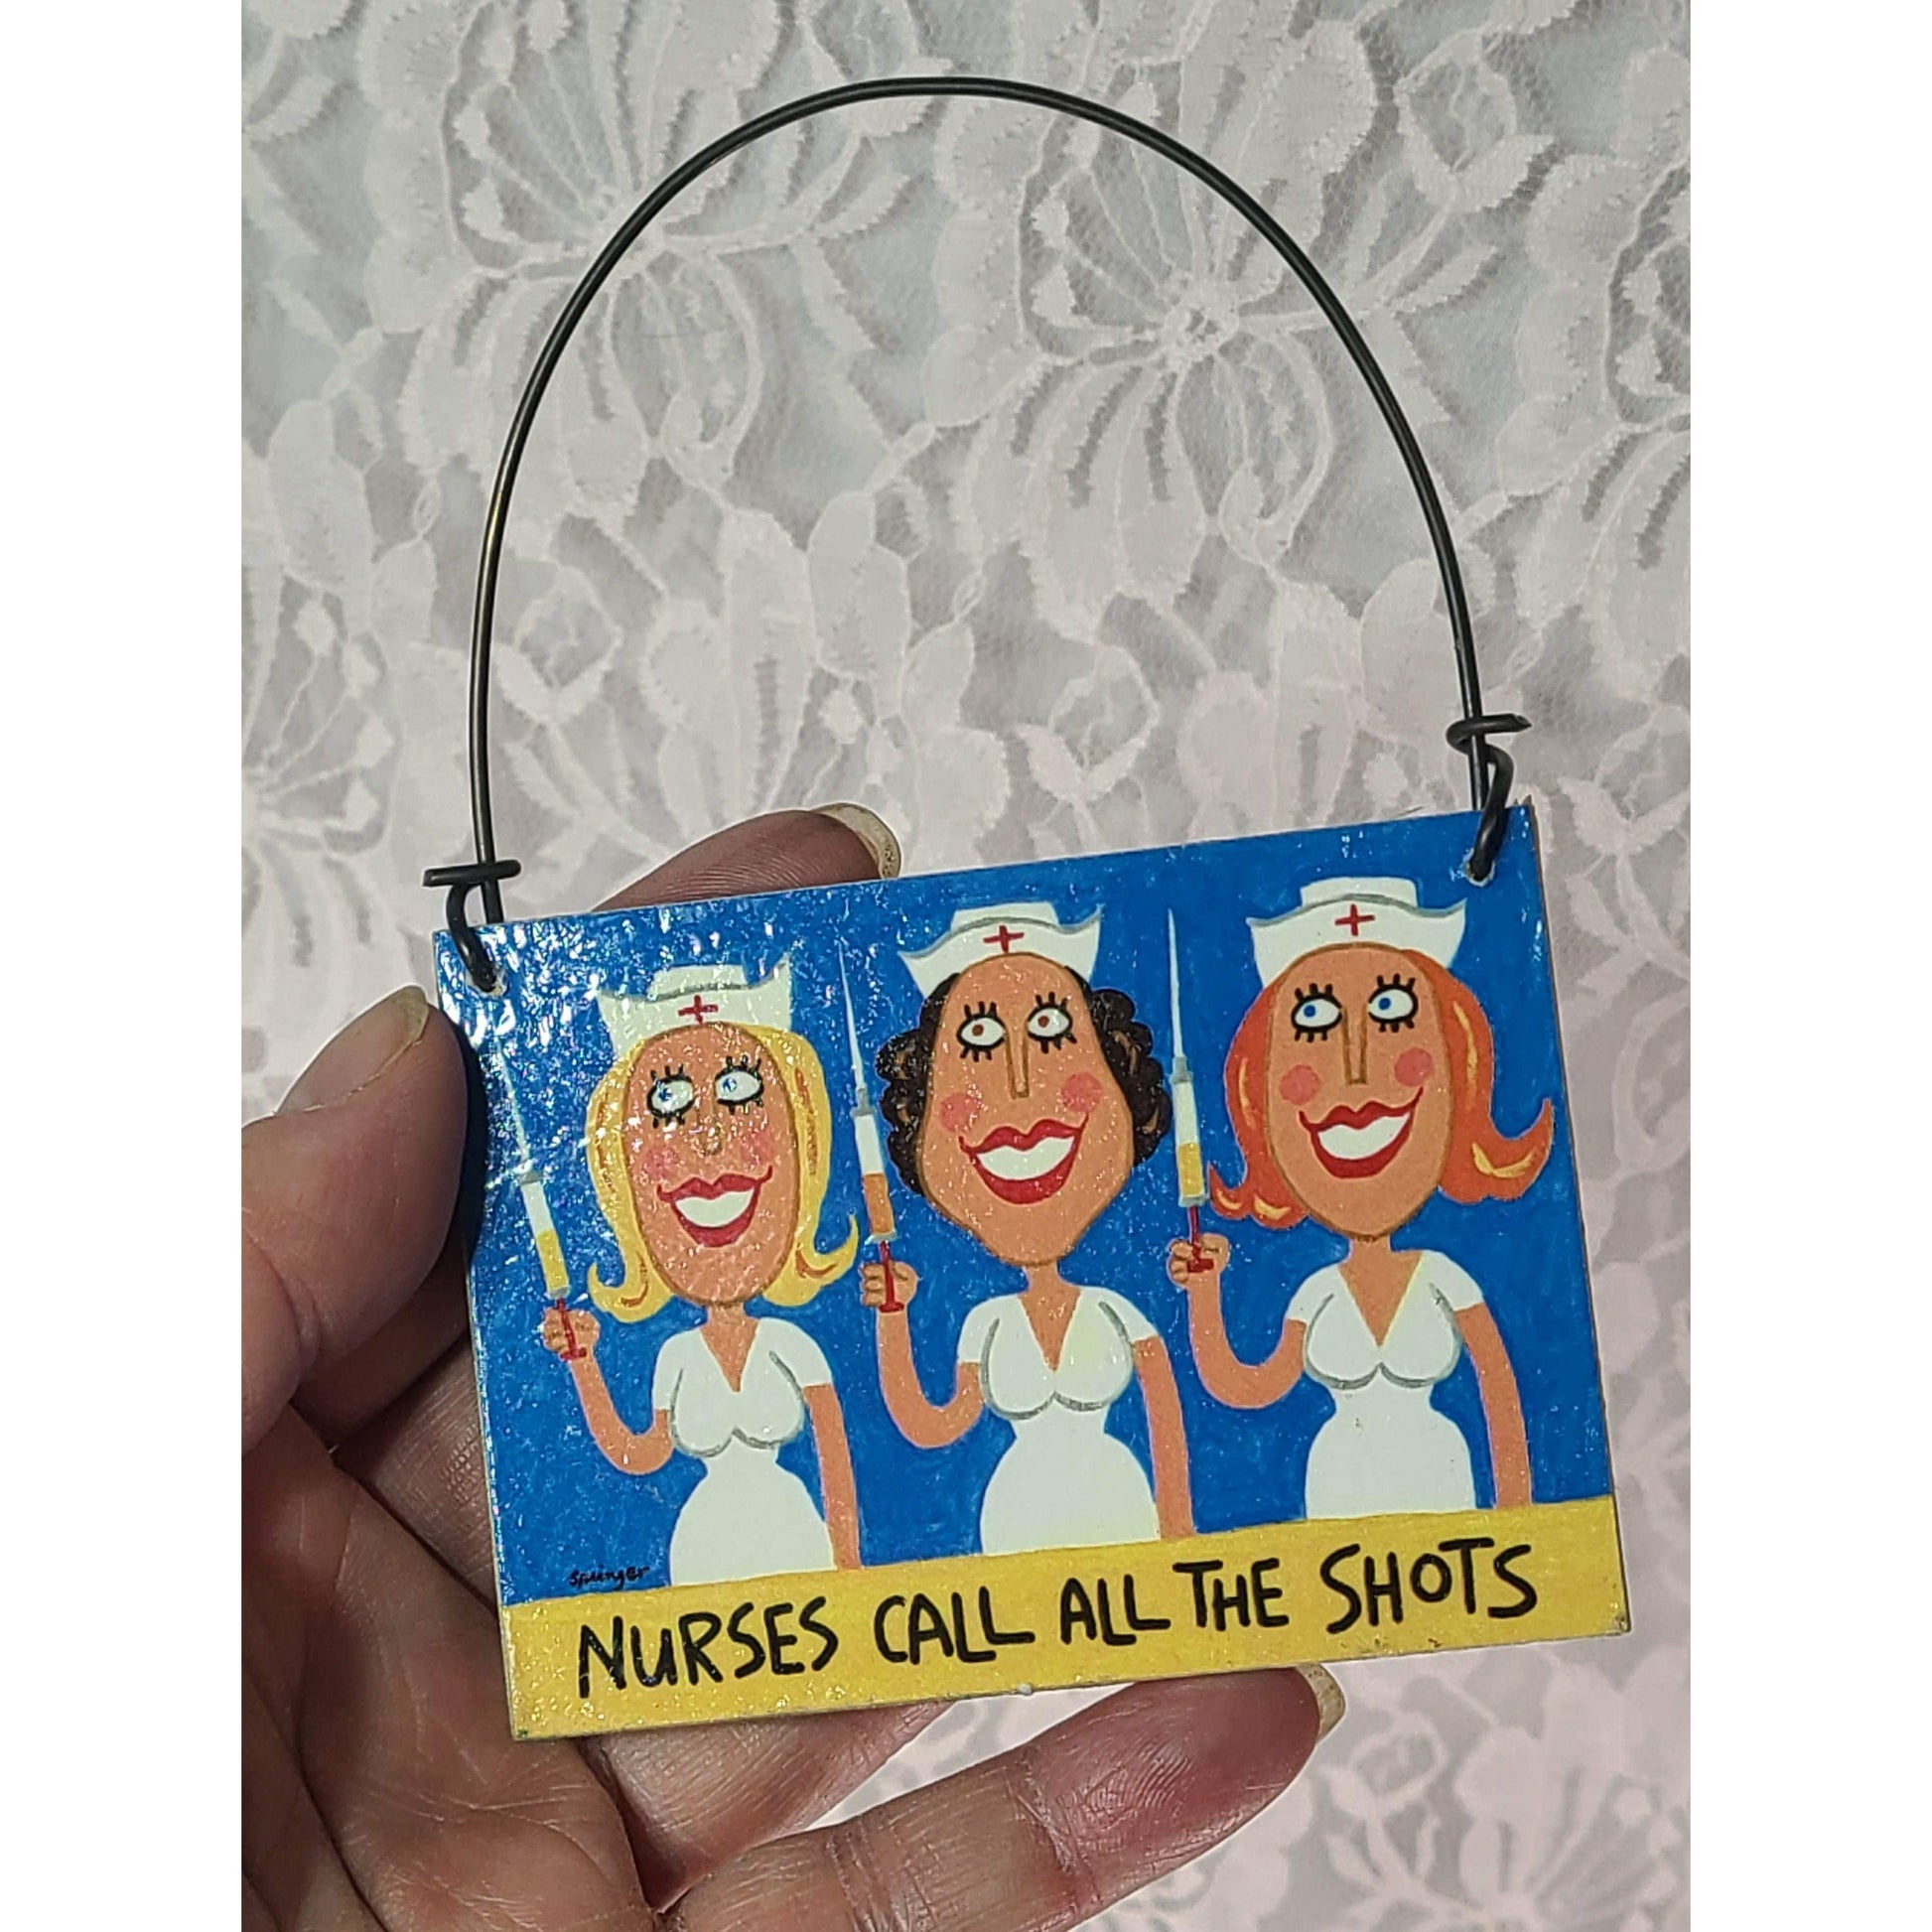 Wood Novelty Sign ~Nurse Gift ~"Nurses Call All The Shots" ~Wall Hanging Ornament ~ Small 3.5" by 2.5" ~ Gift for Healthcare Worker